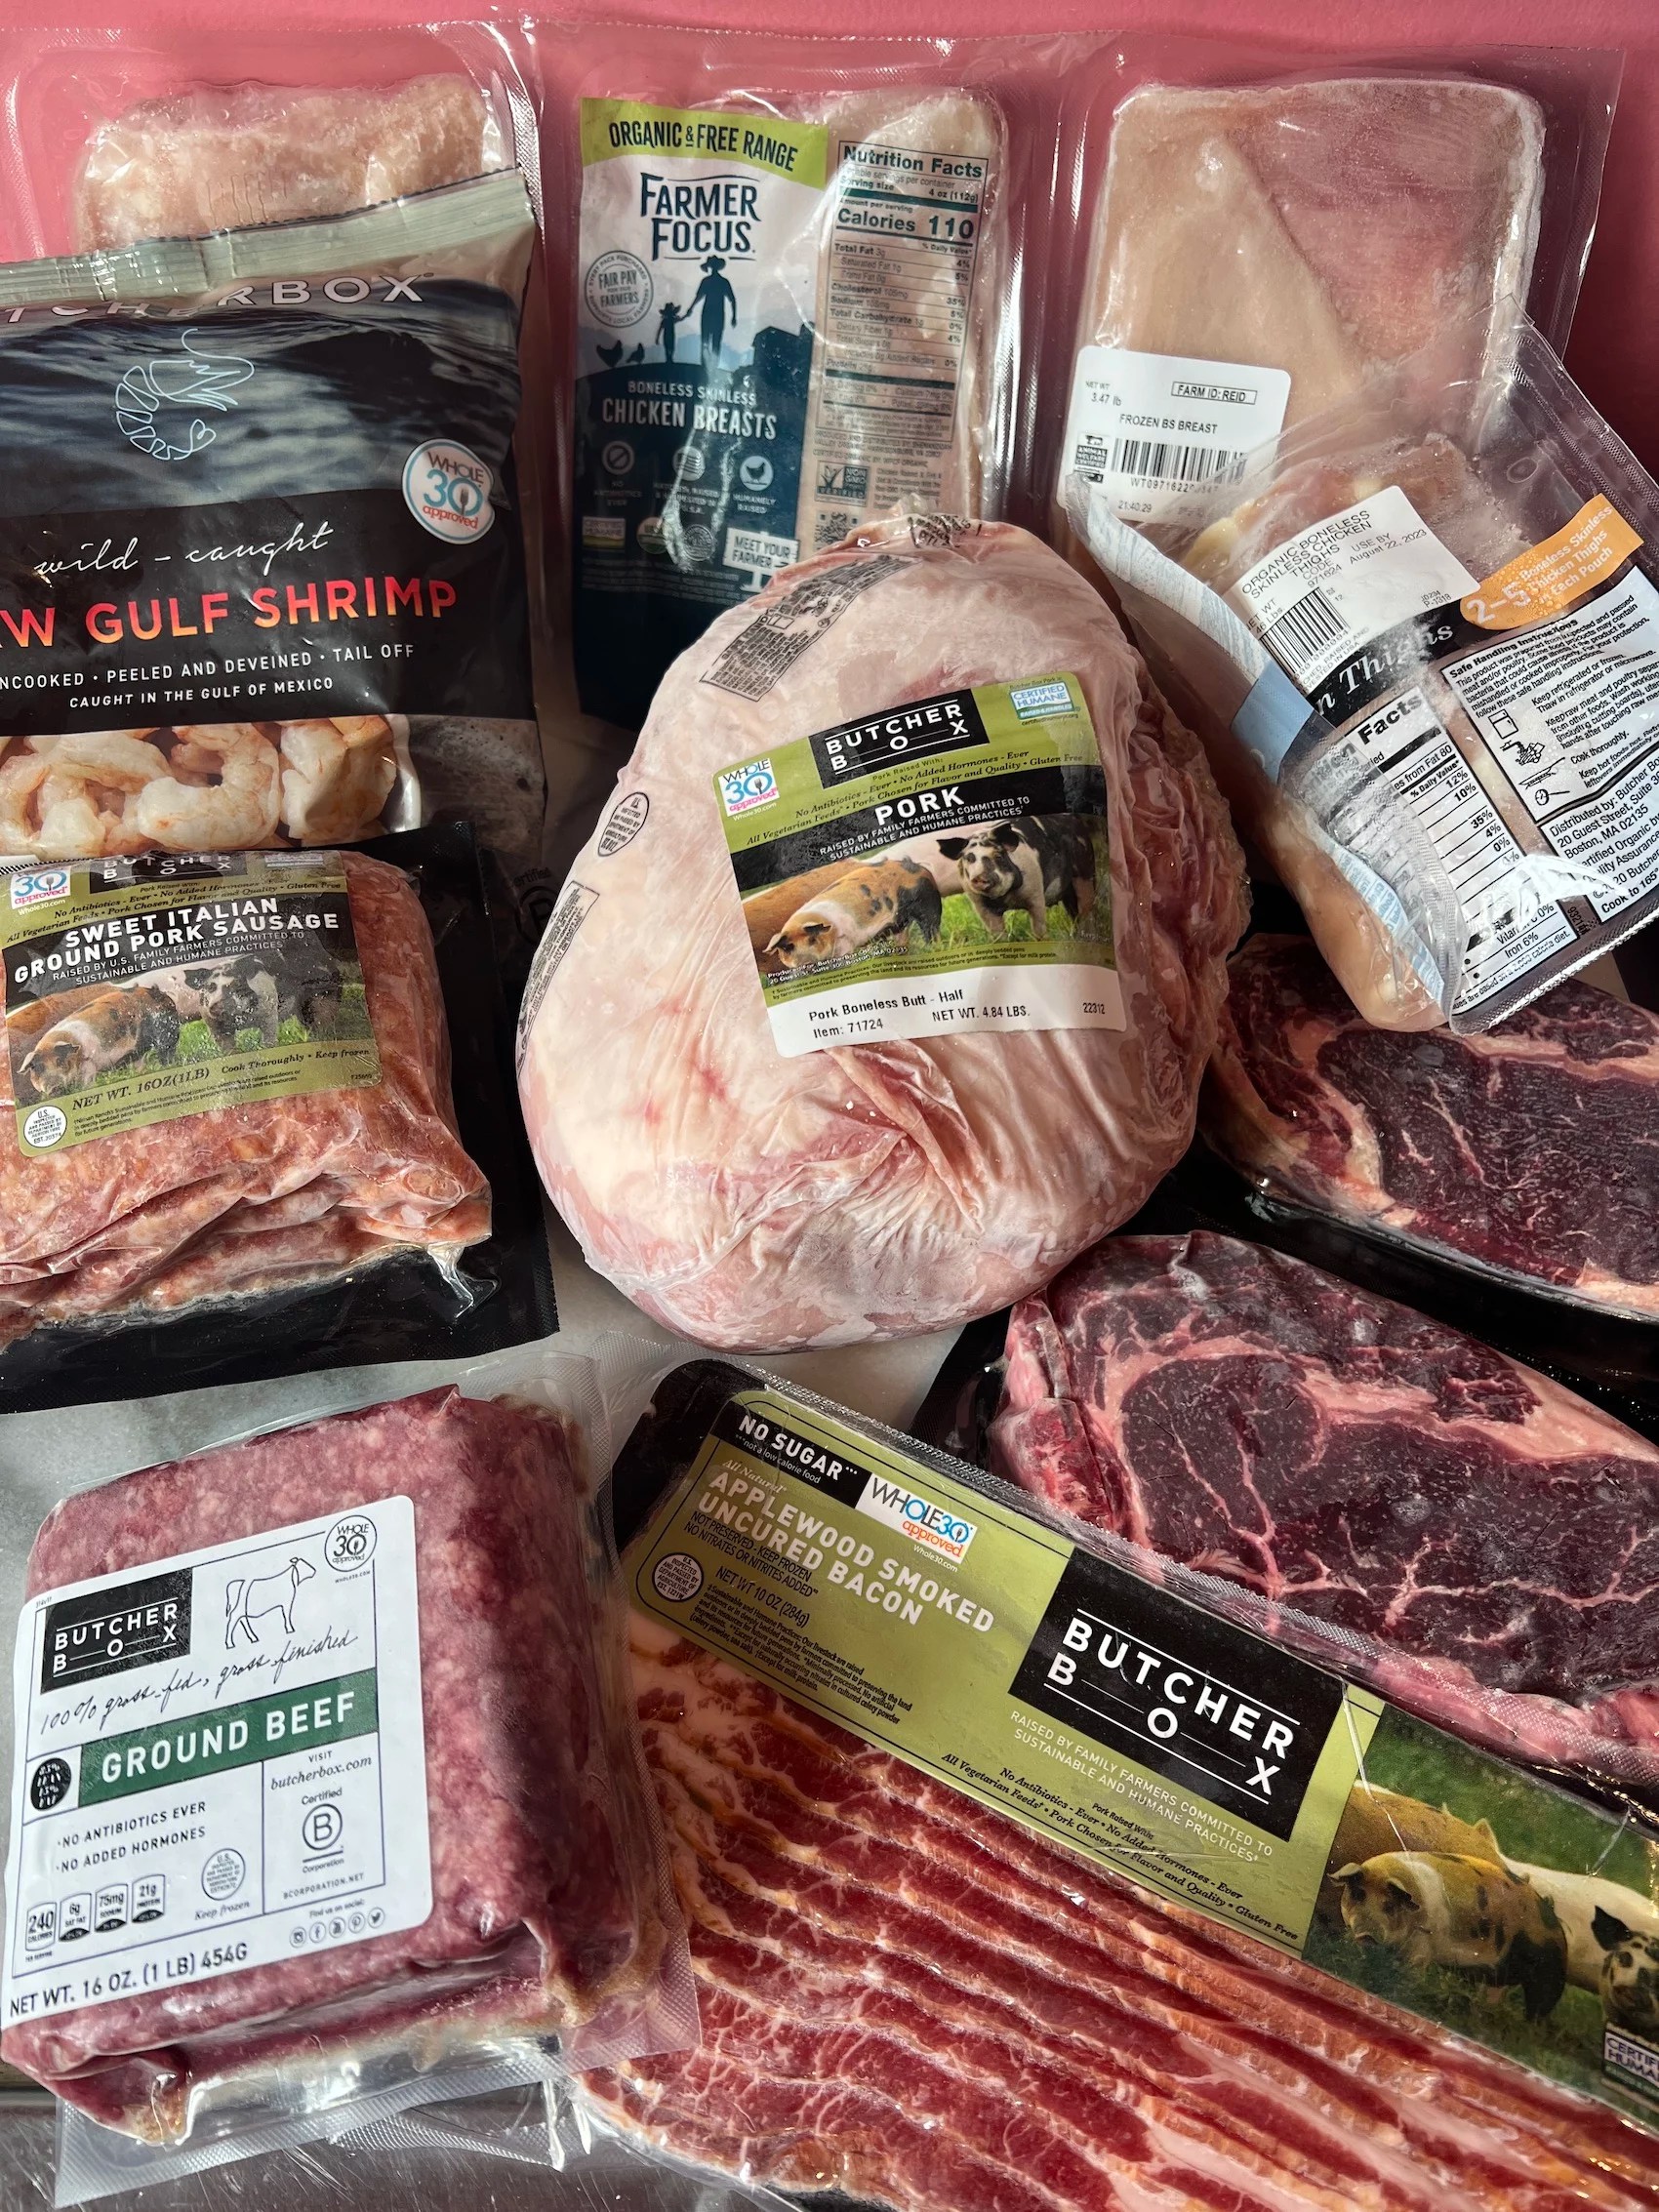 ButcherBox Prices: Is Butcher Box Worth it? - The Clean Eating Couple